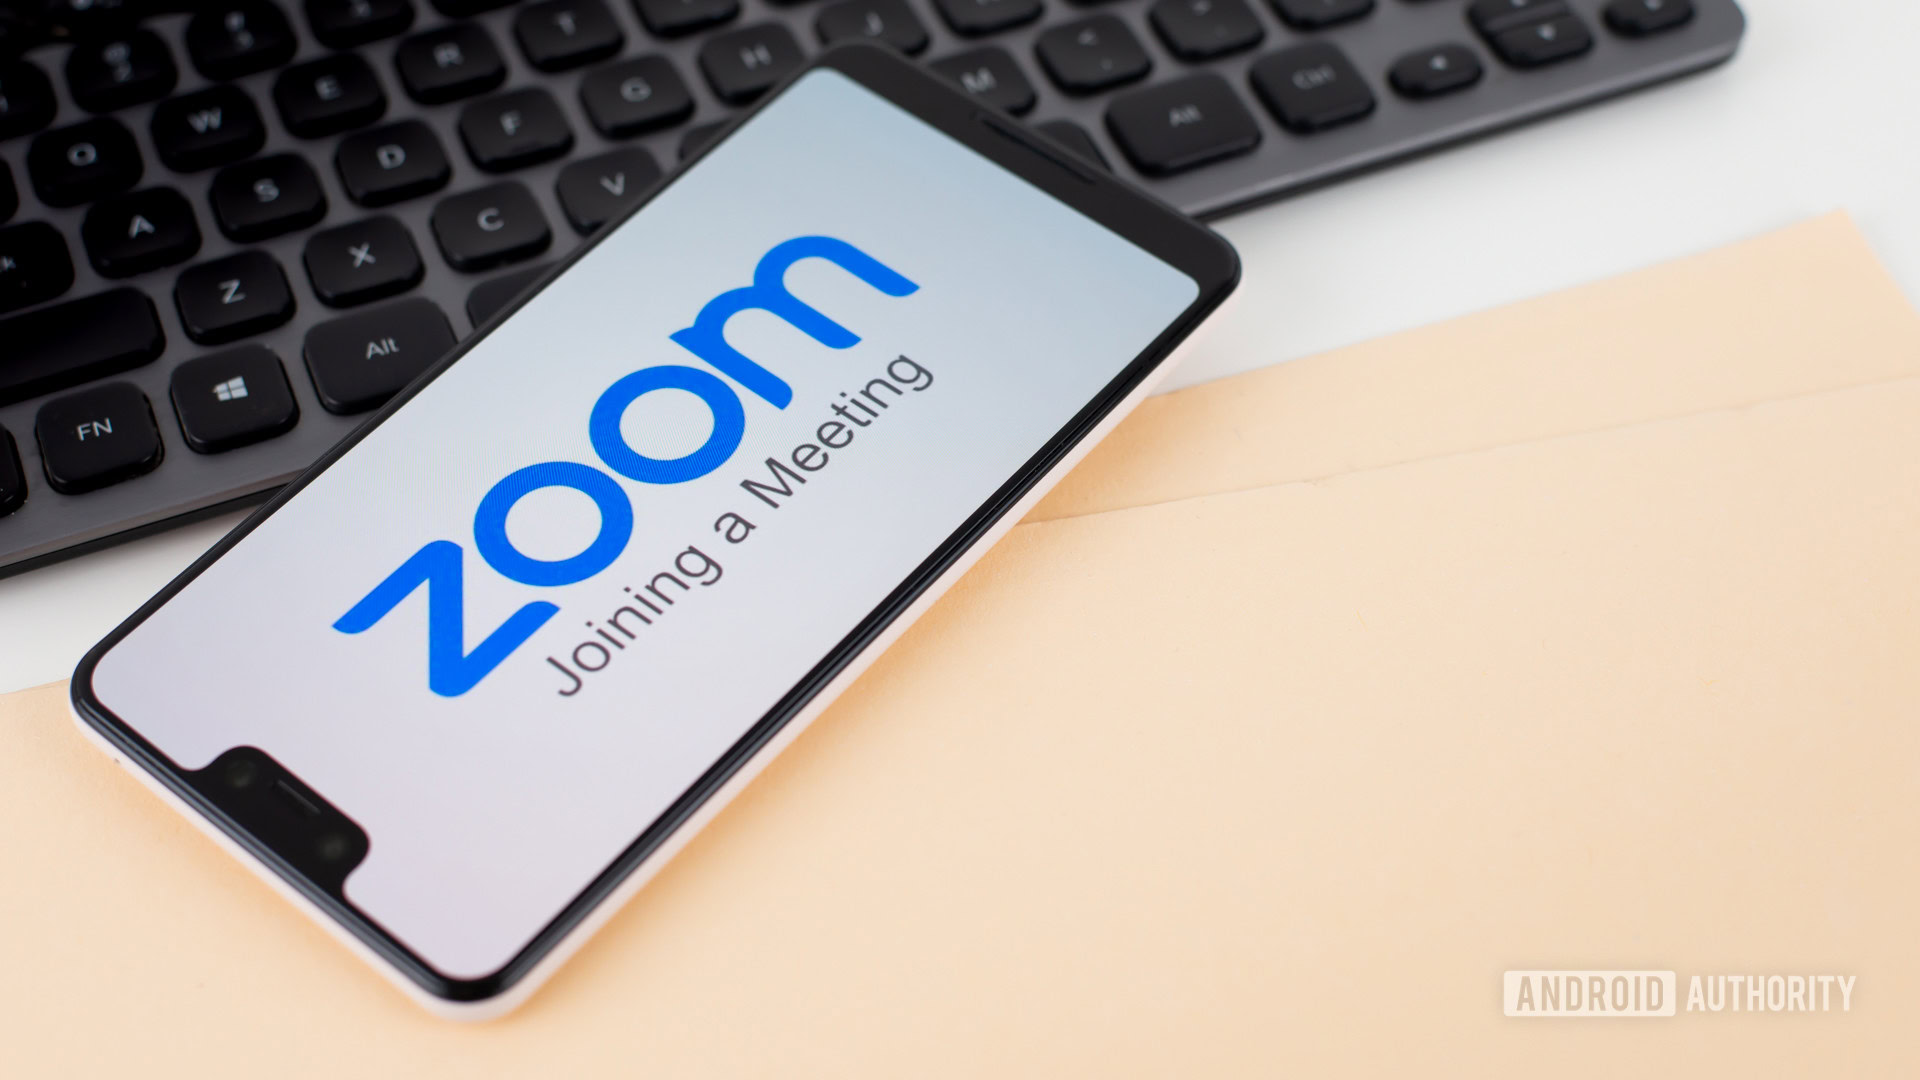 What is Zoom Meetings, how much does it cost, and is it worth it?